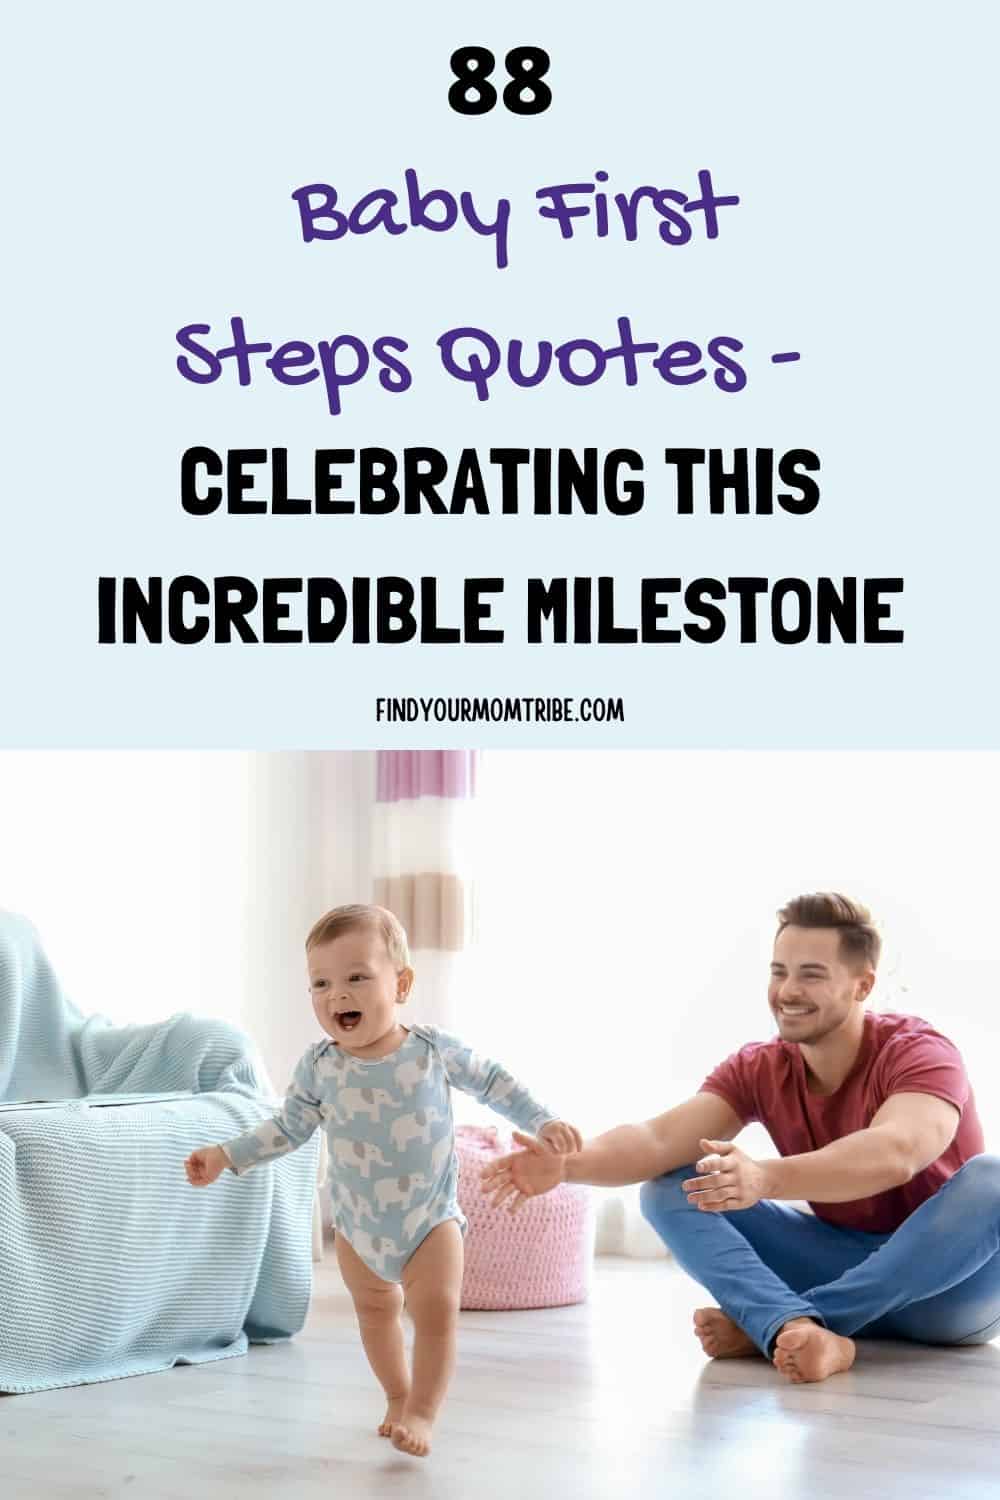  Pinterest baby first steps quotes